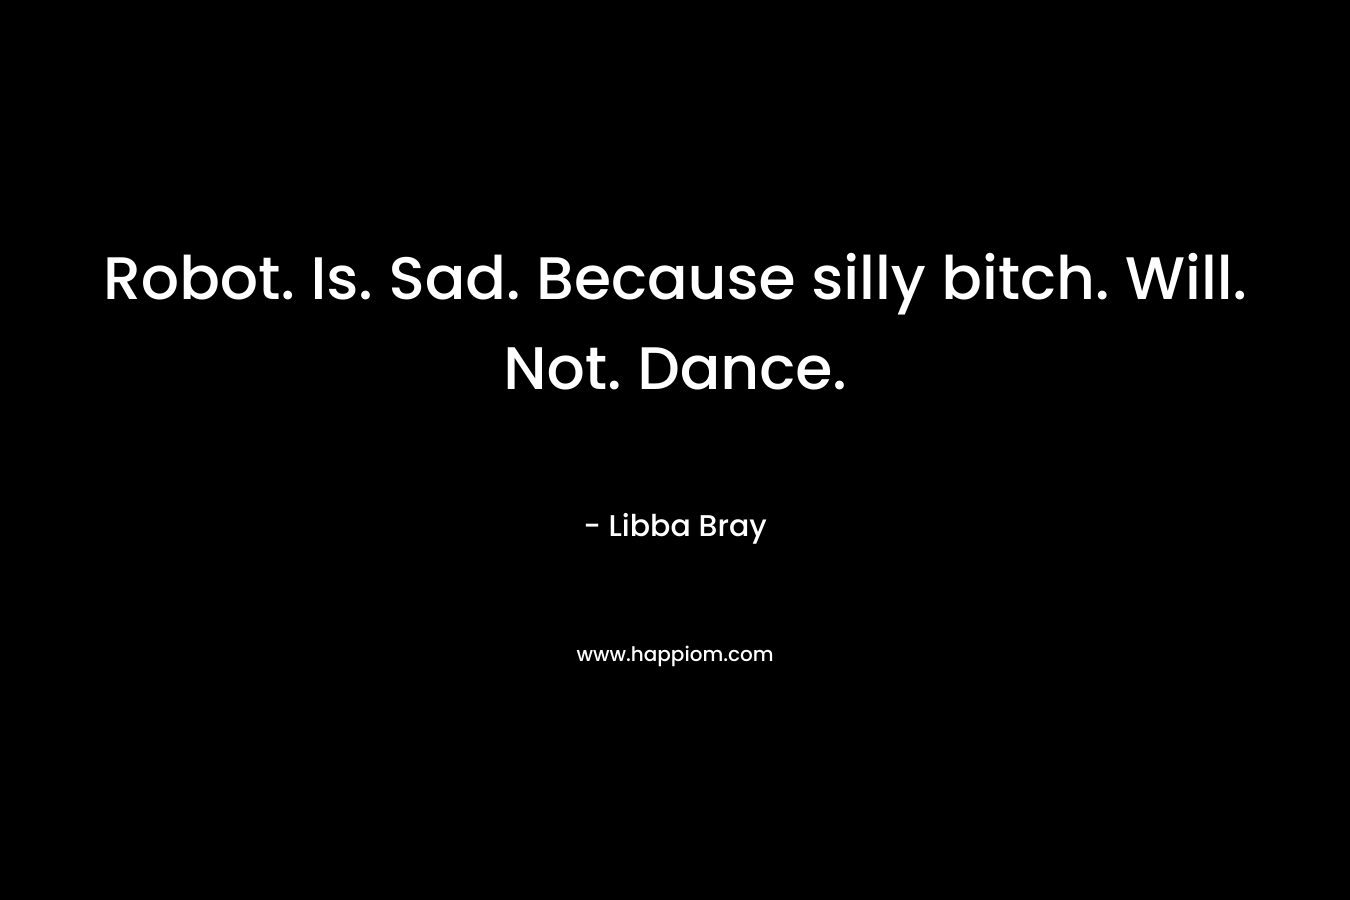 Robot. Is. Sad. Because silly bitch. Will. Not. Dance. – Libba Bray